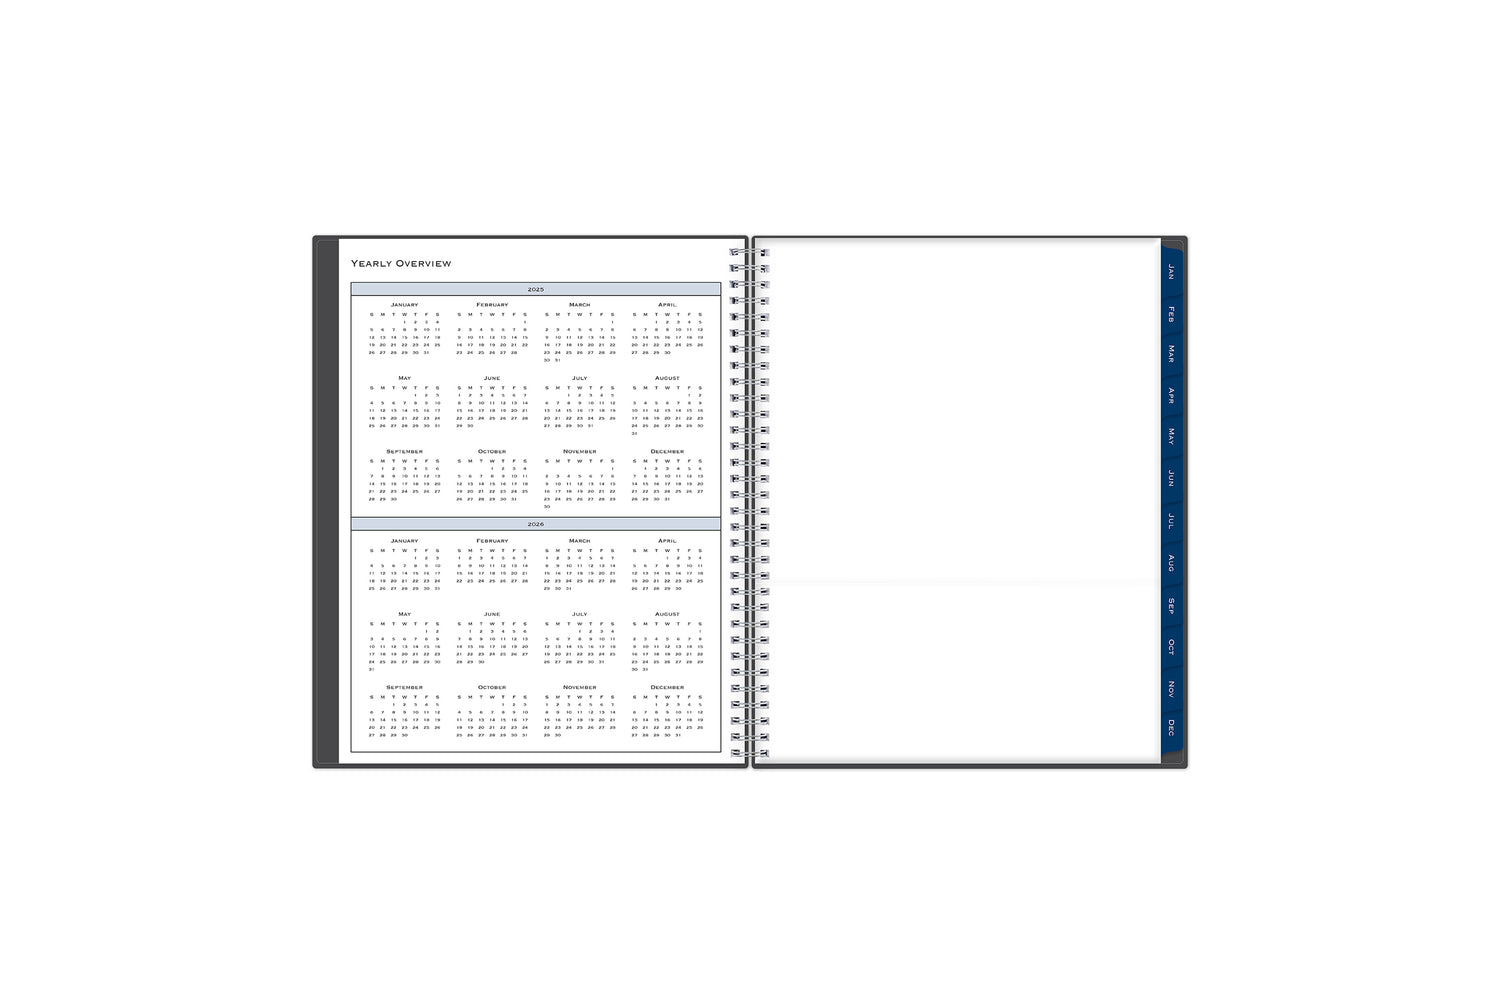 The 2025 weekly monthly appointment book features yearly overview for both 2025, 2026 alongside a year end goals list and ownership page.